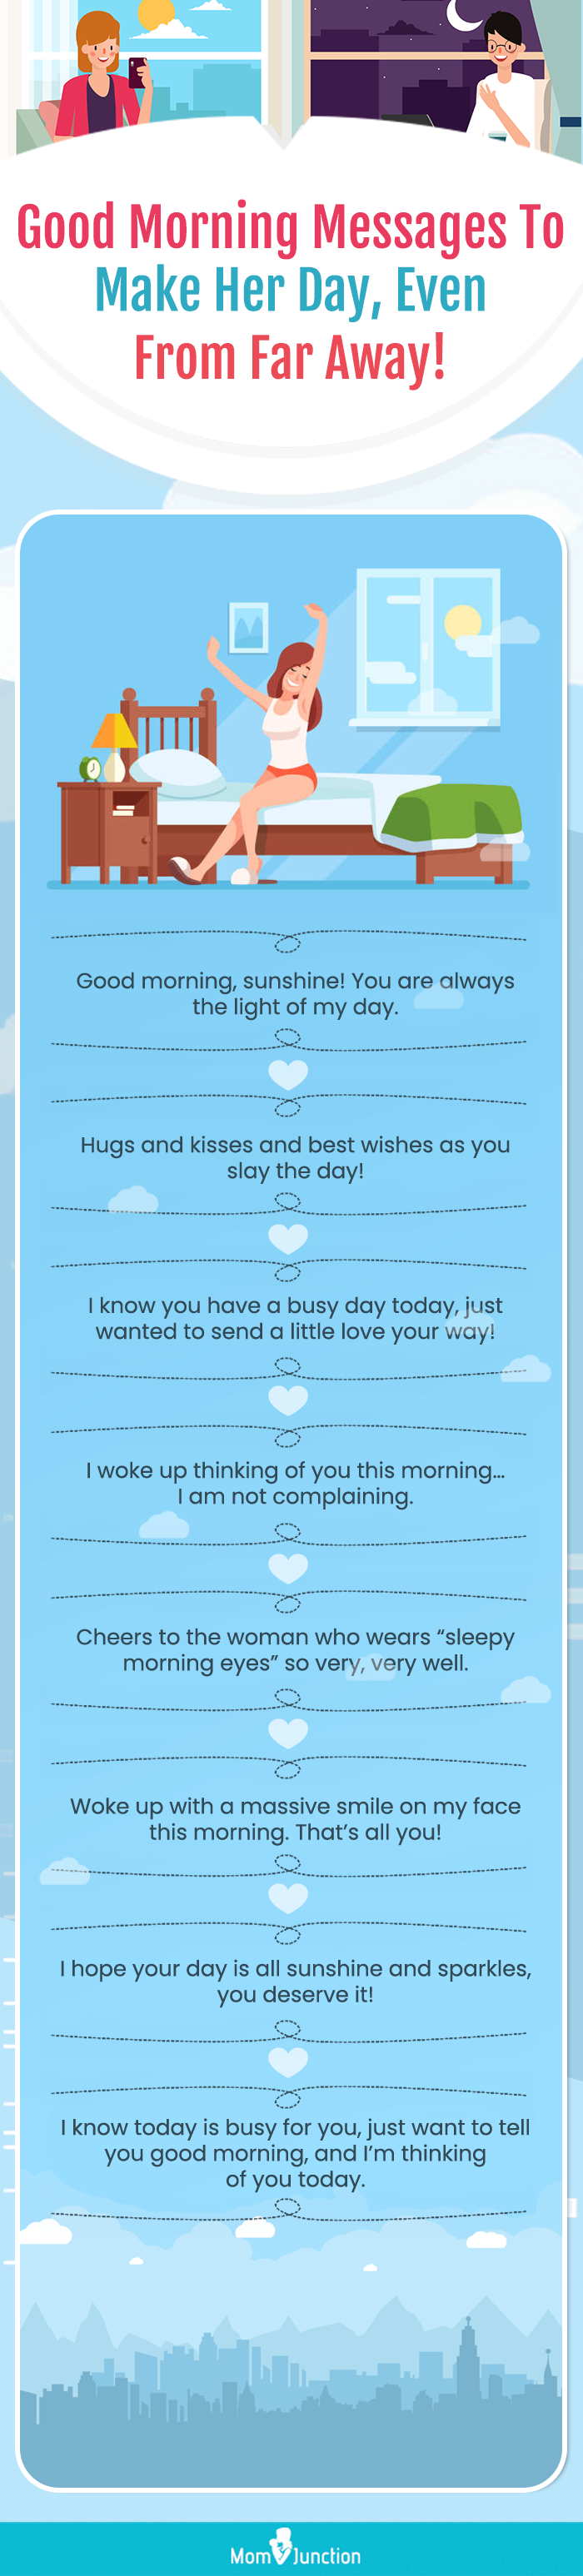 good morning messages to her [infographic]